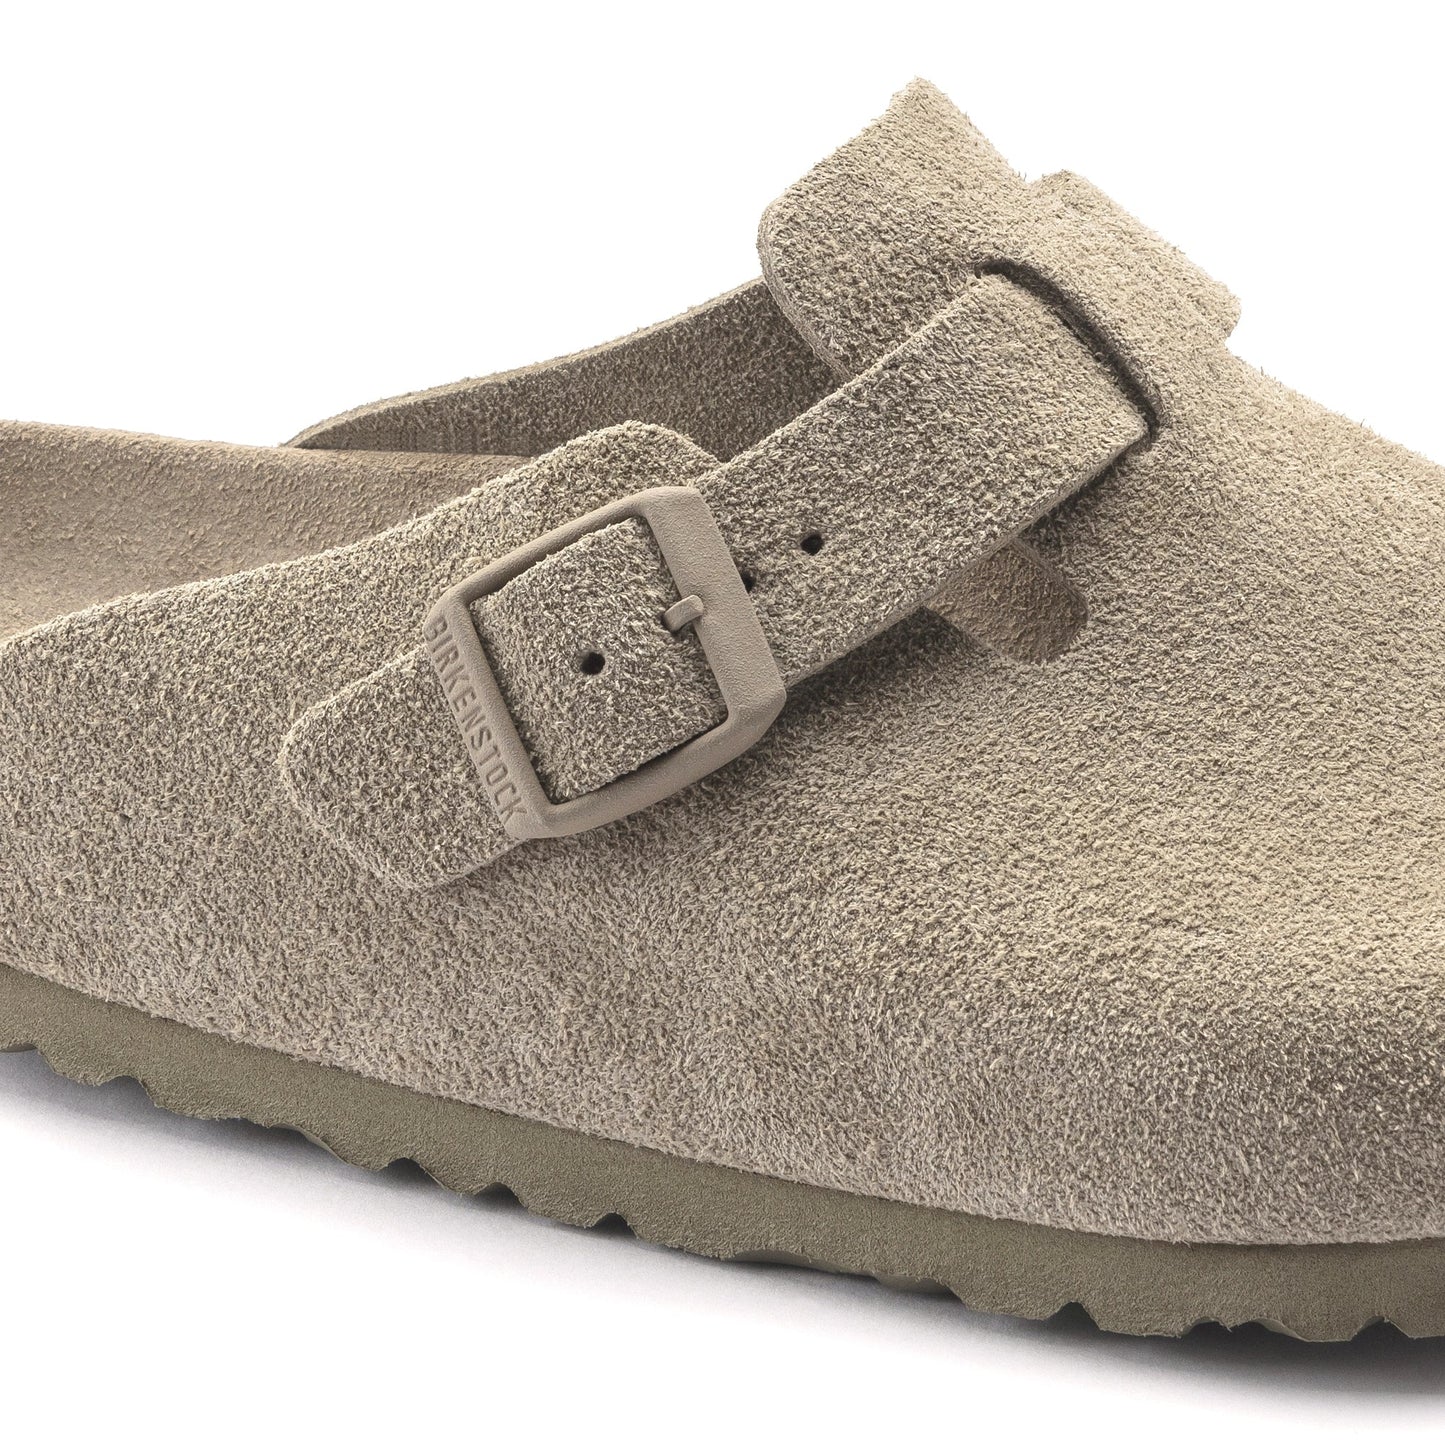 Birkenstock Boston Soft Footbed Suede Leather Faded Khaki Narrow Fit 1019108